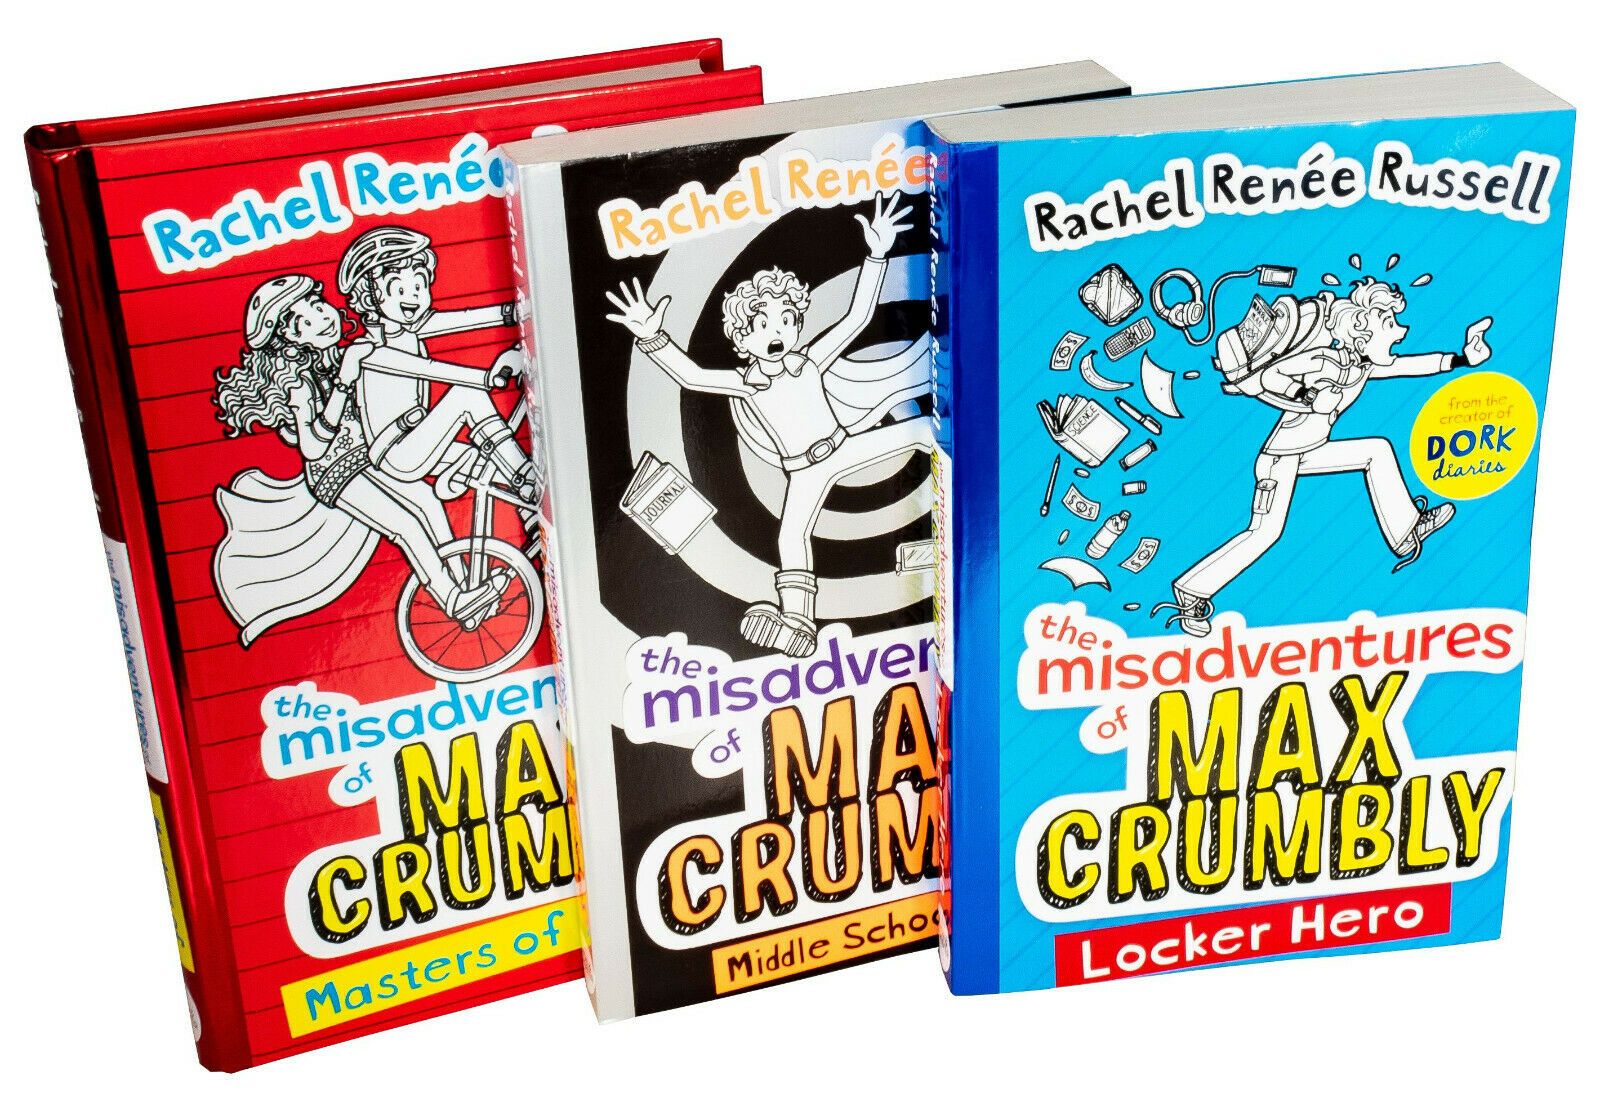 Russell Misadventures Of Max Crumbly 3 Books Children Collection Paperback Set By Rachel Renne - St Stephens Books